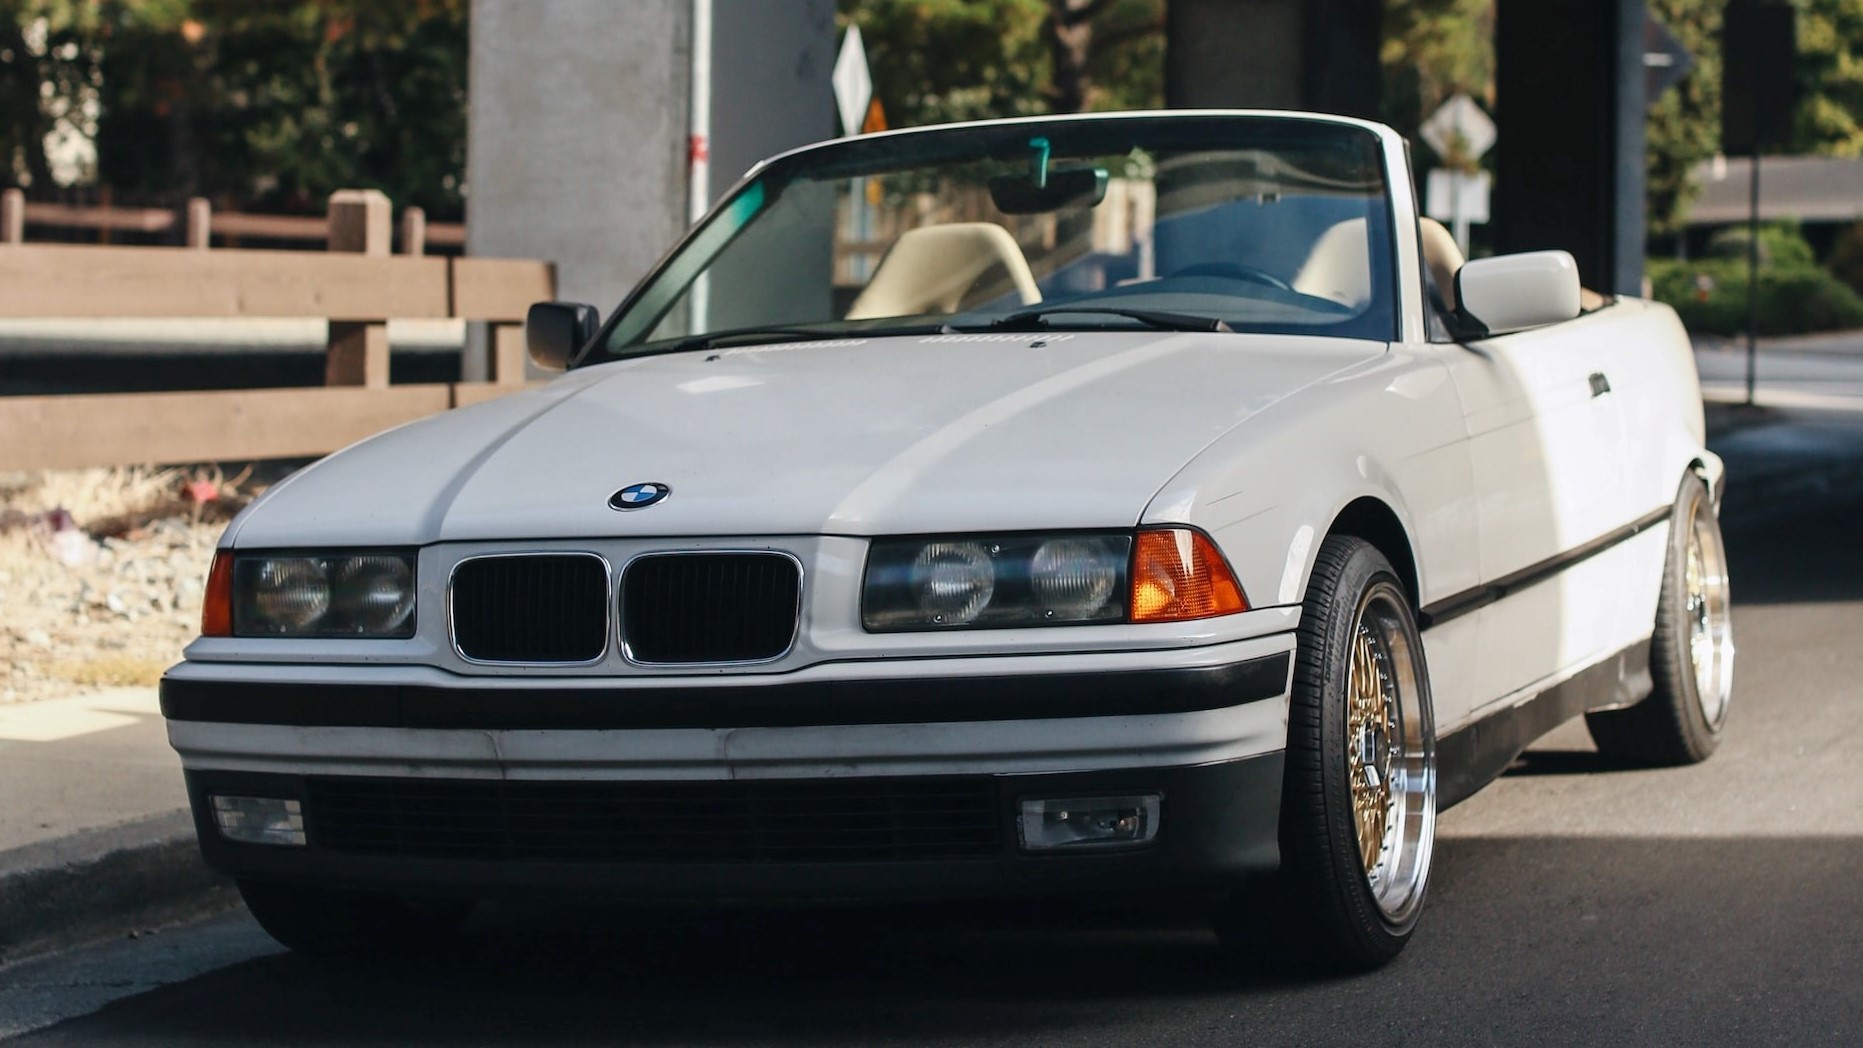 White convertible bmw parked on the side of the road | Goodwill Car Donations